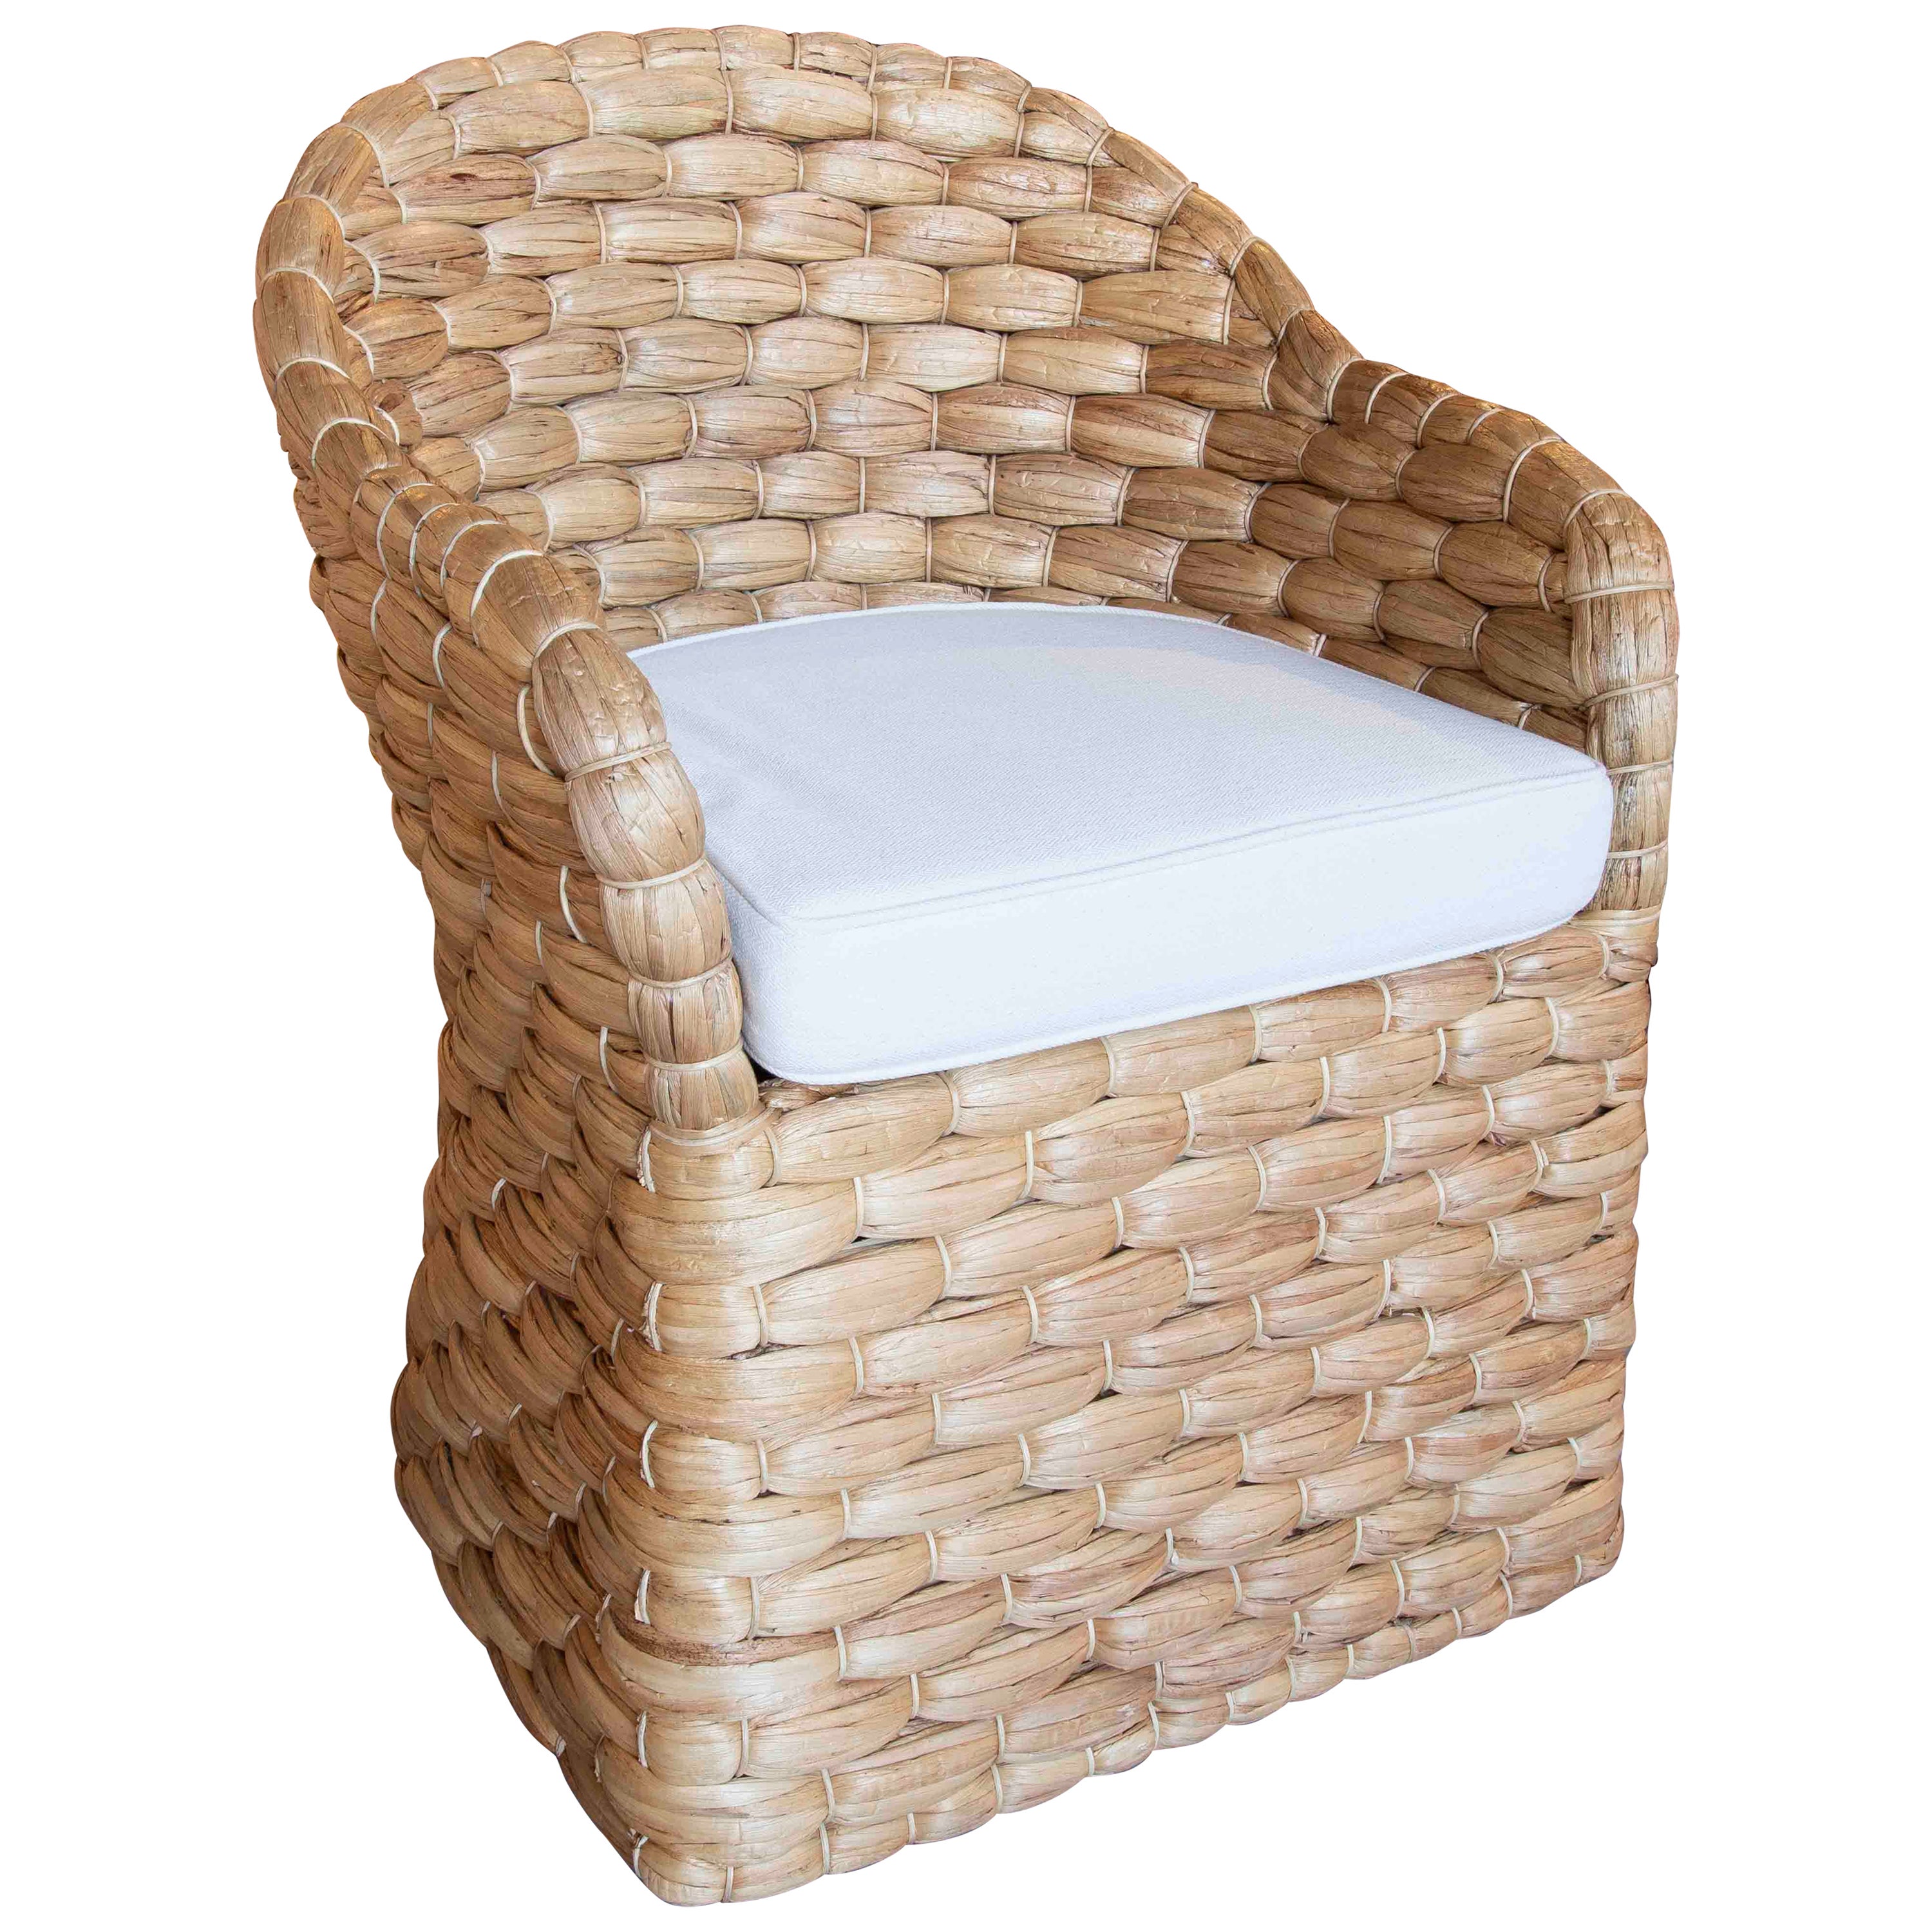  Rattan Armchair with Backrest and Cushion in White